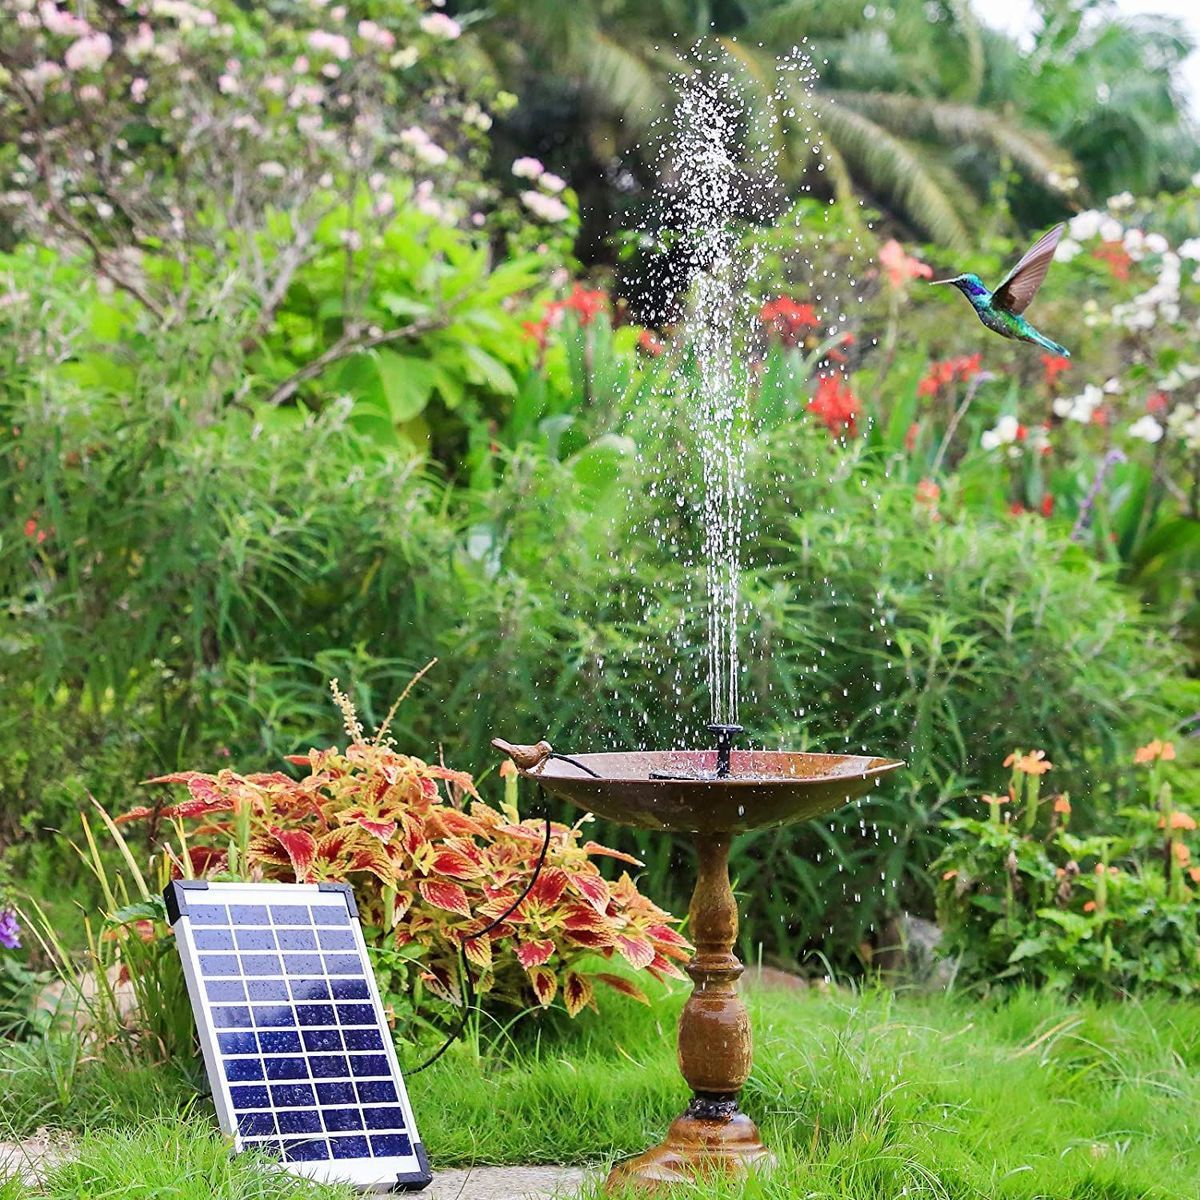 12V Solar Panel Charging Water Pump Set - For Submersible Electric Use In Rockery Fish Pond Garden Fountain Decoration Fish Pond